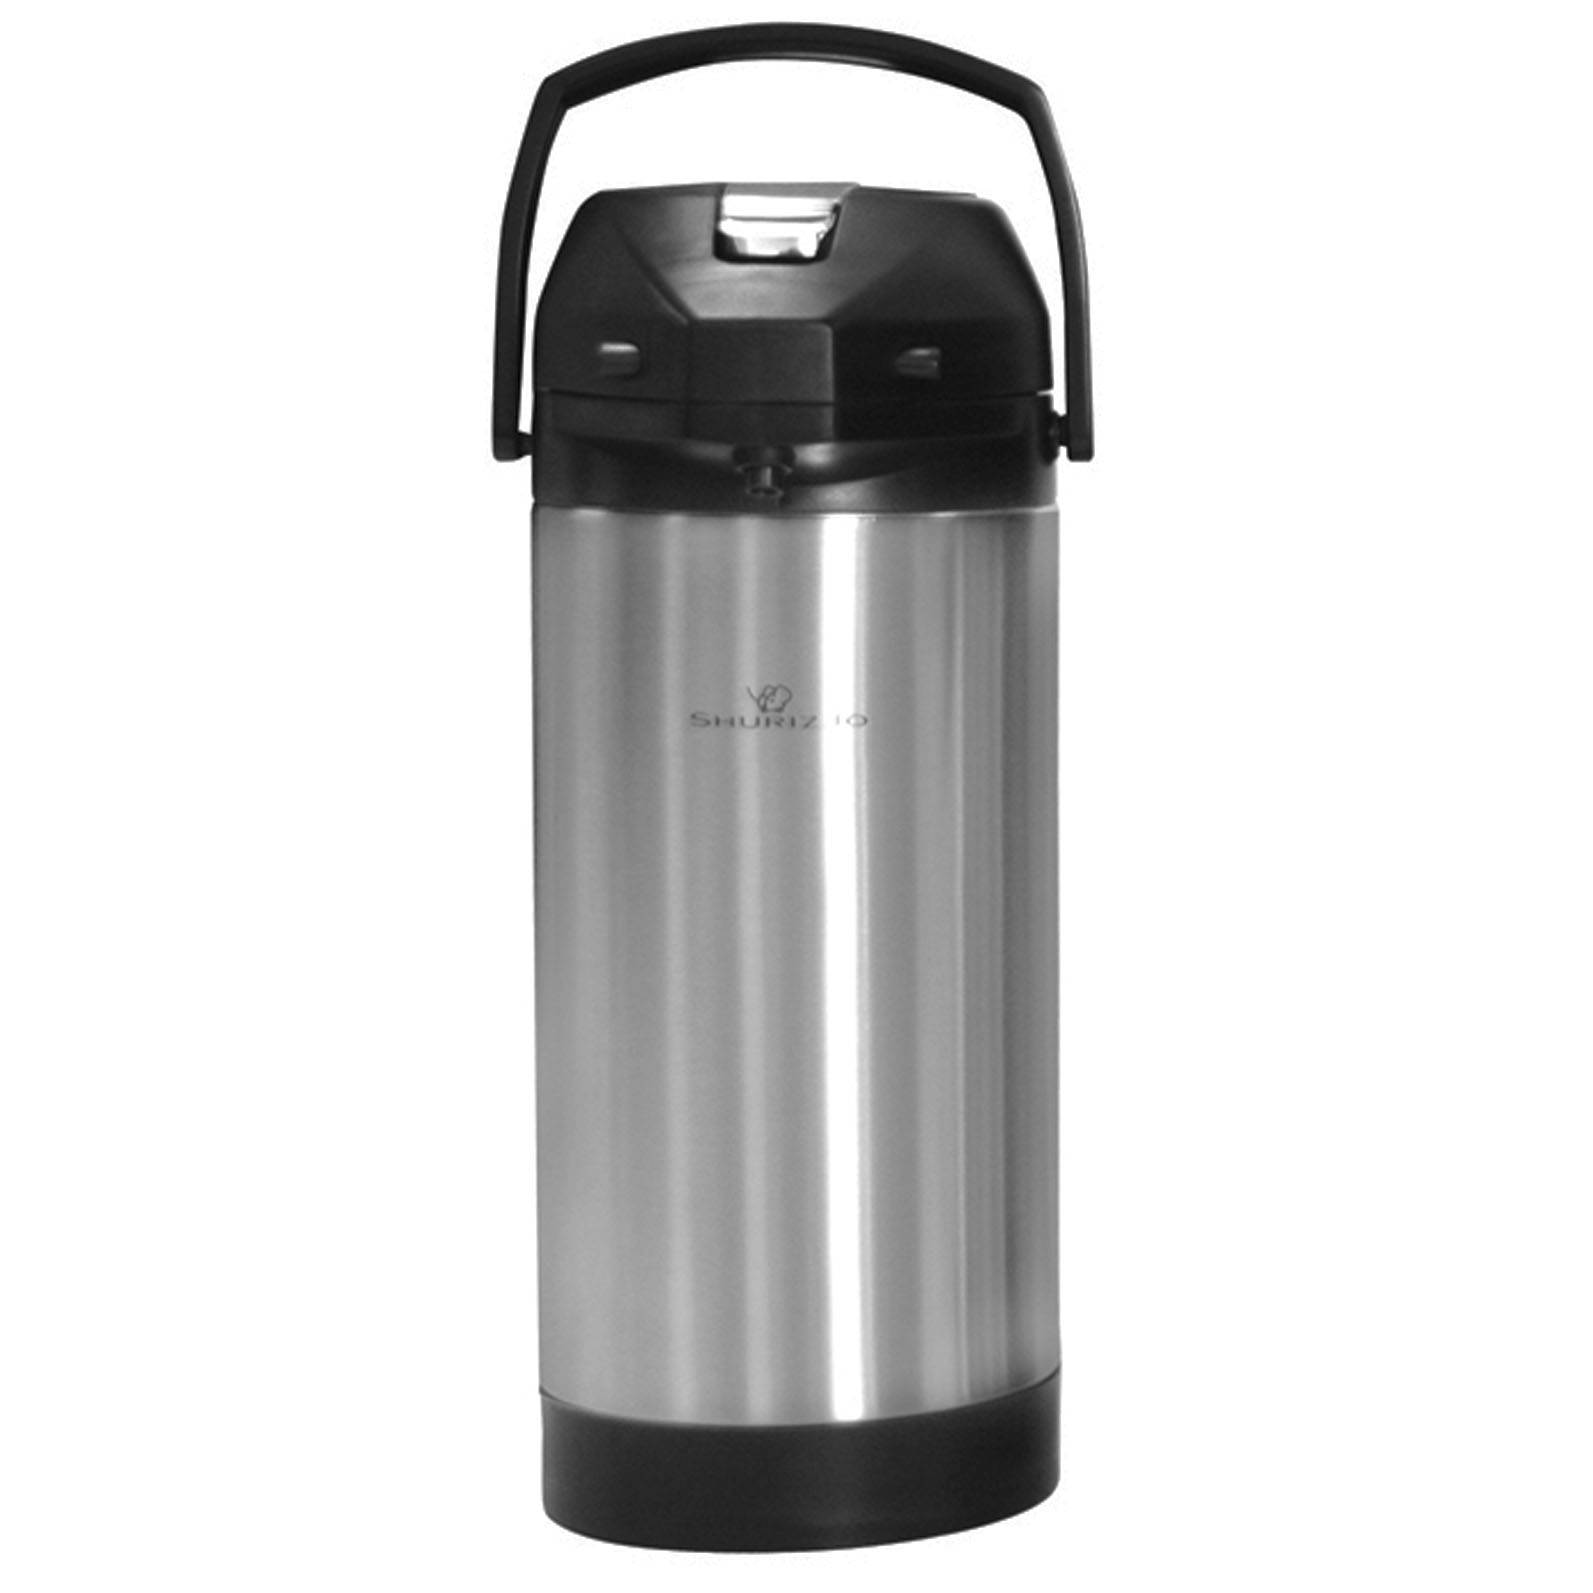 3.8 liter stainless steel lined vacuum insulated Shurizjo 3.8 LTR airpot with black plastic lid and handle